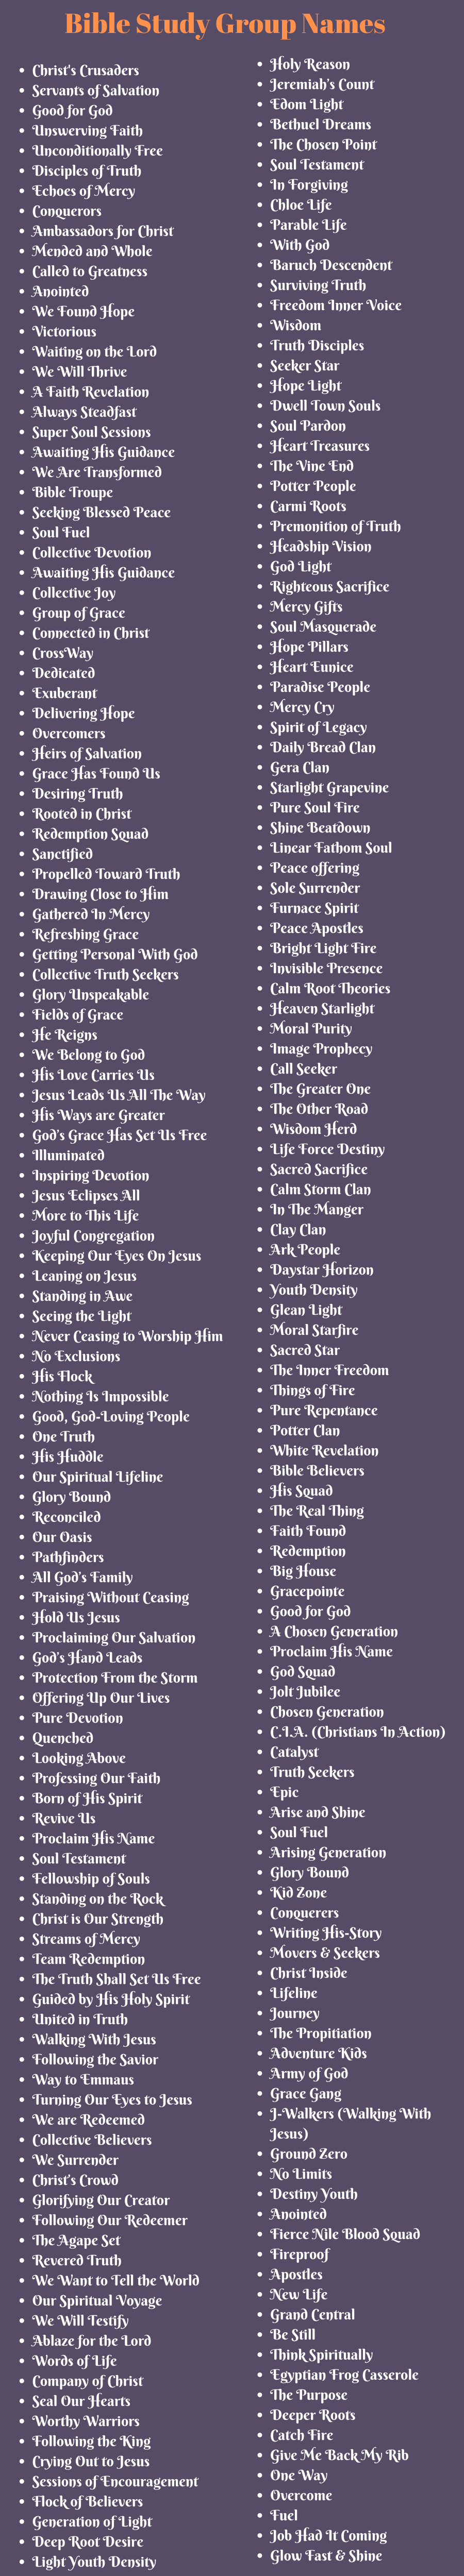 childrens ministry name ideas